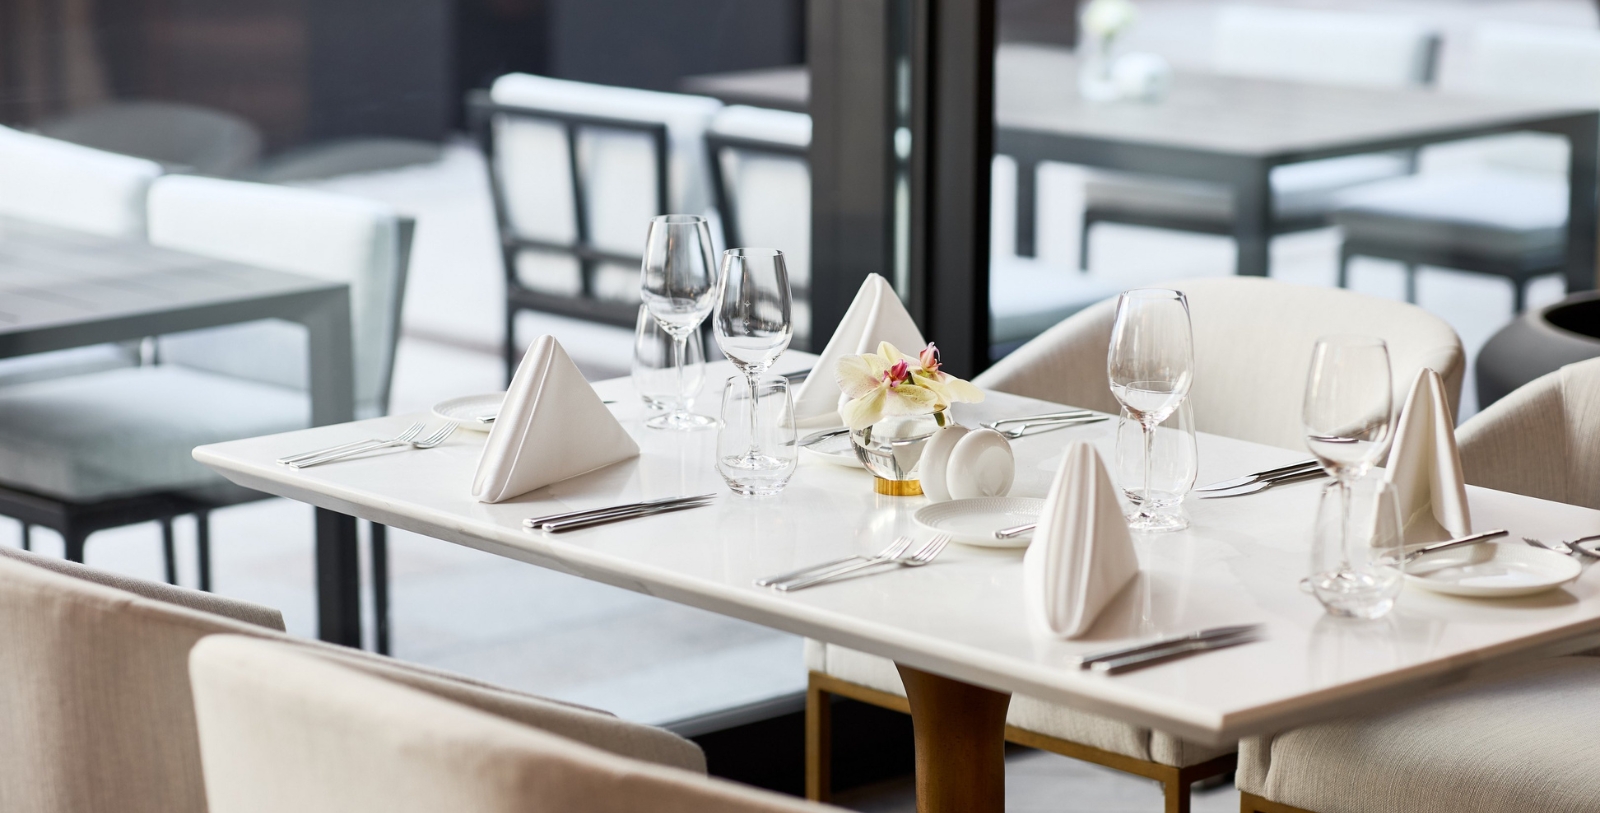 Take afternoon tea at Lilja, the hotel’s fine dining destination that combines regional inspiration with classic French technique.